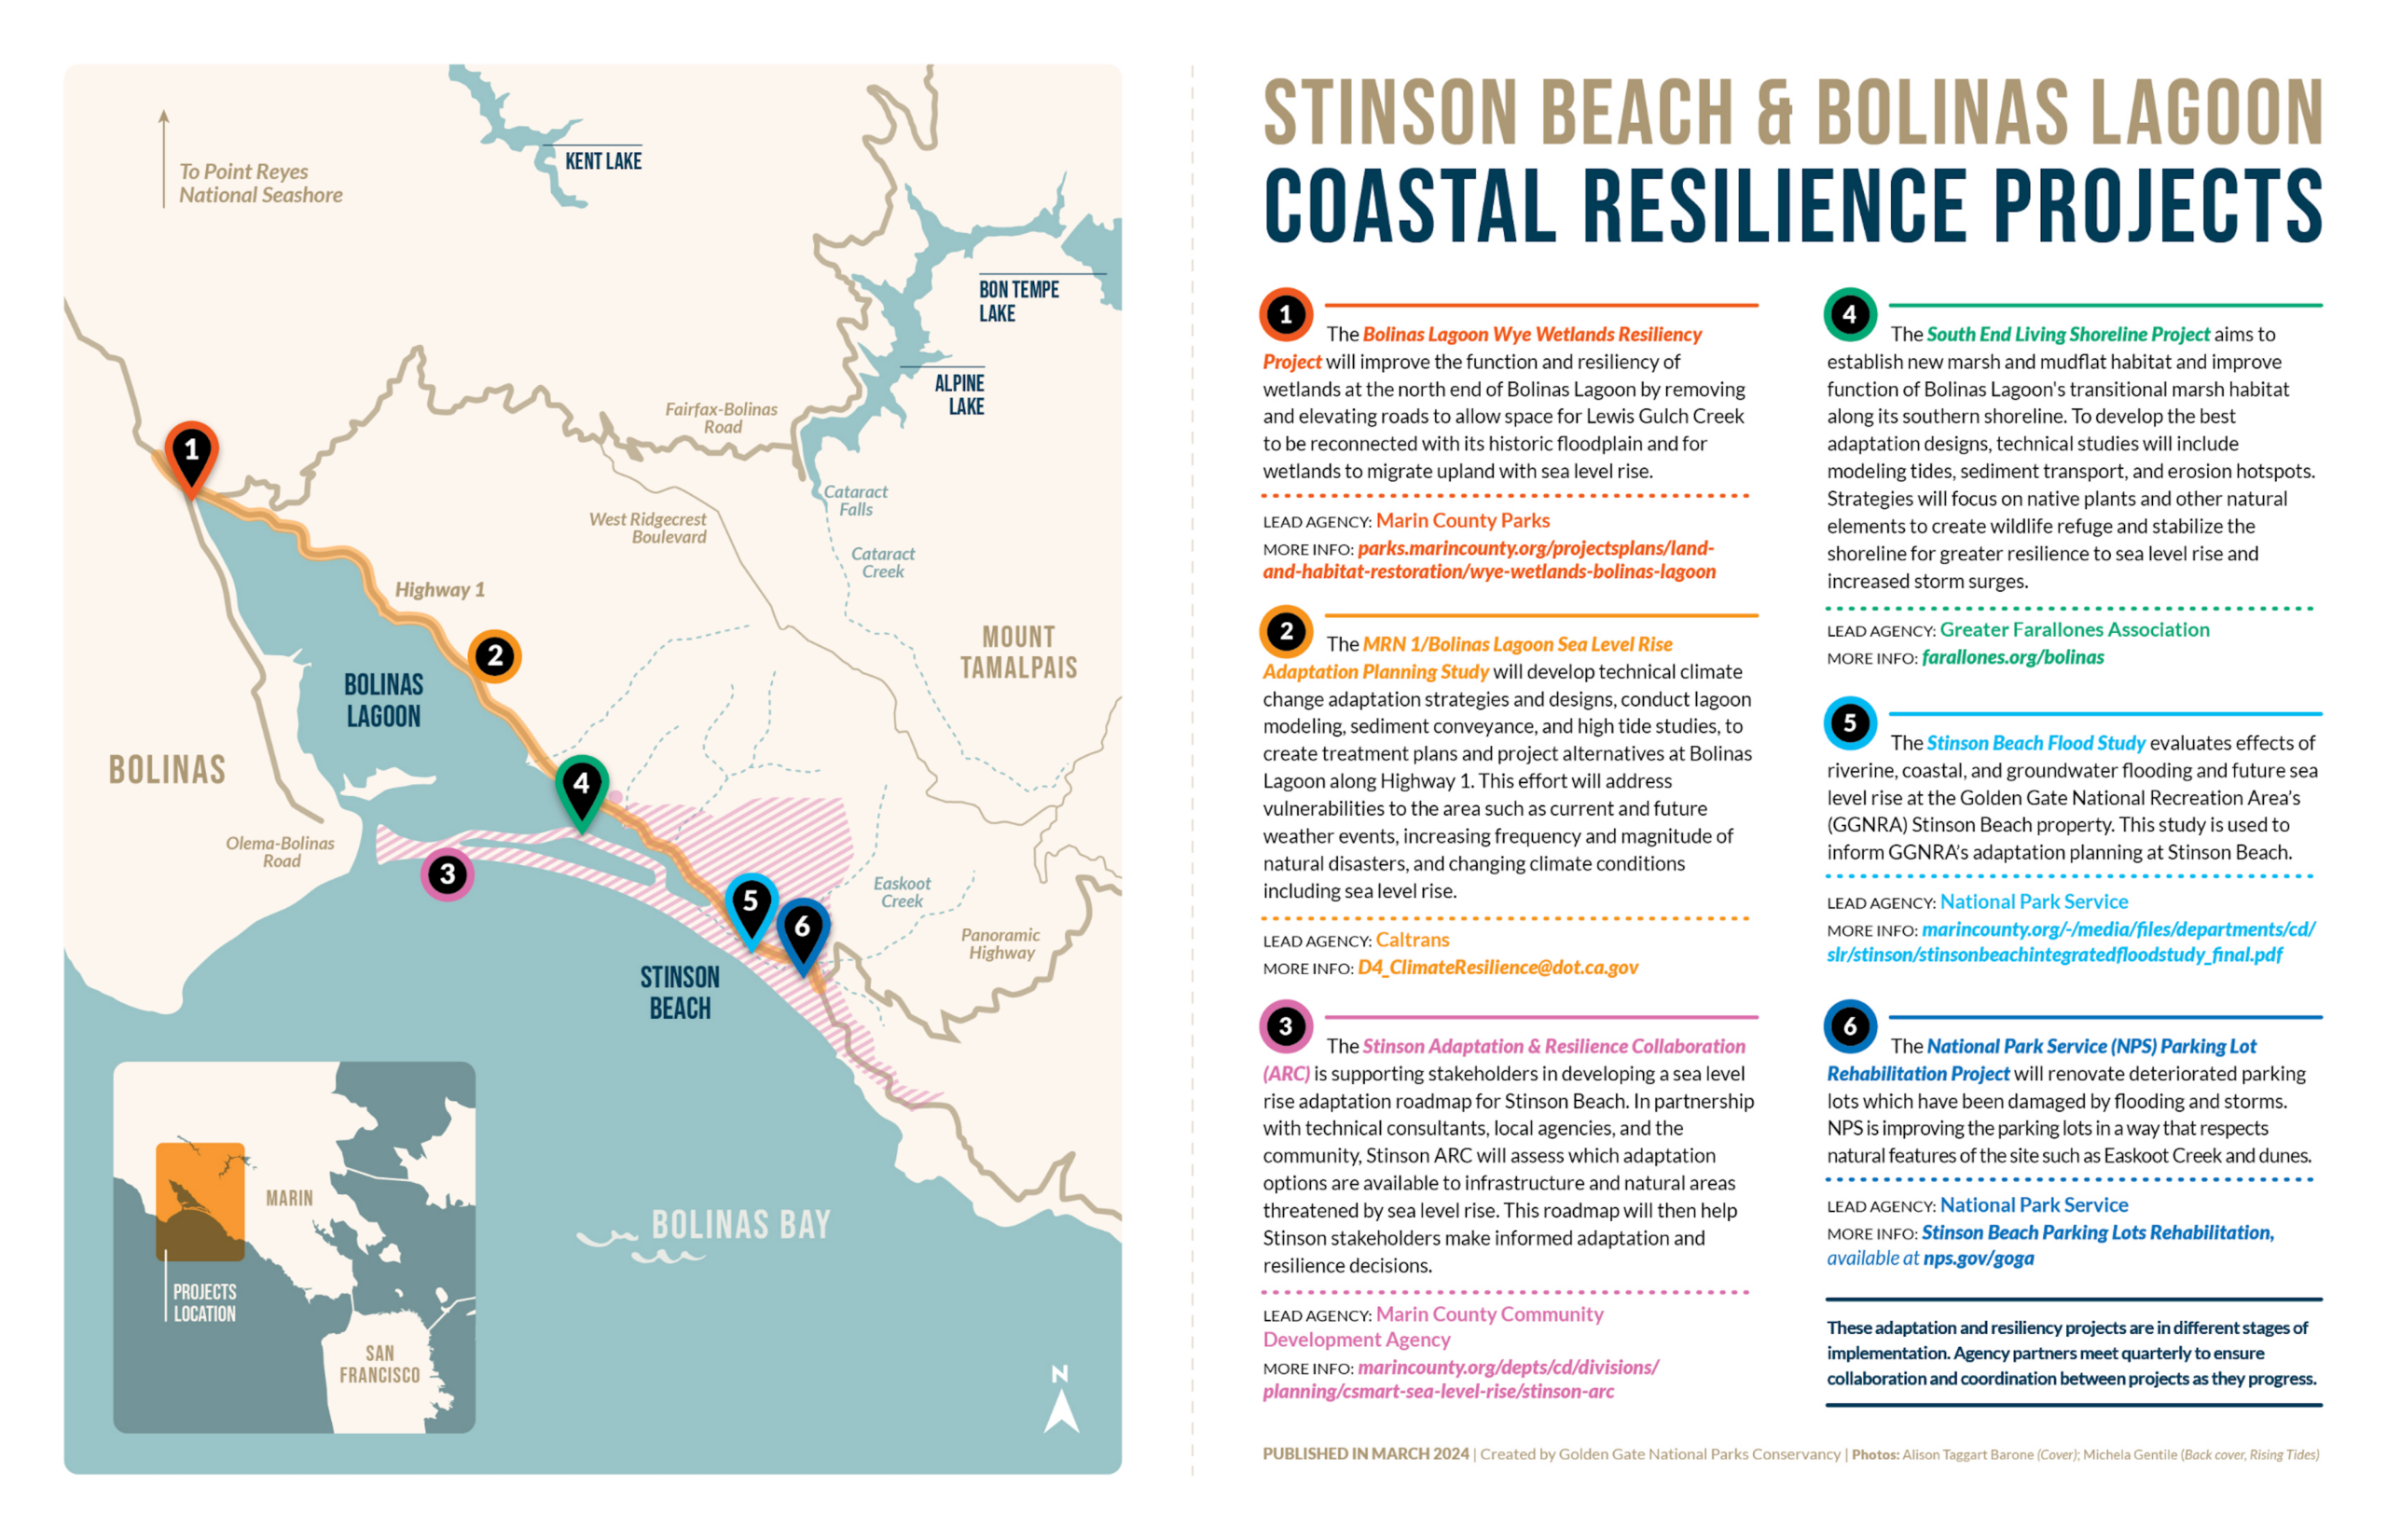 An illustrated map demonstrating where coastal resillience projects are currently underway or planned within Bolinas Lagoon.